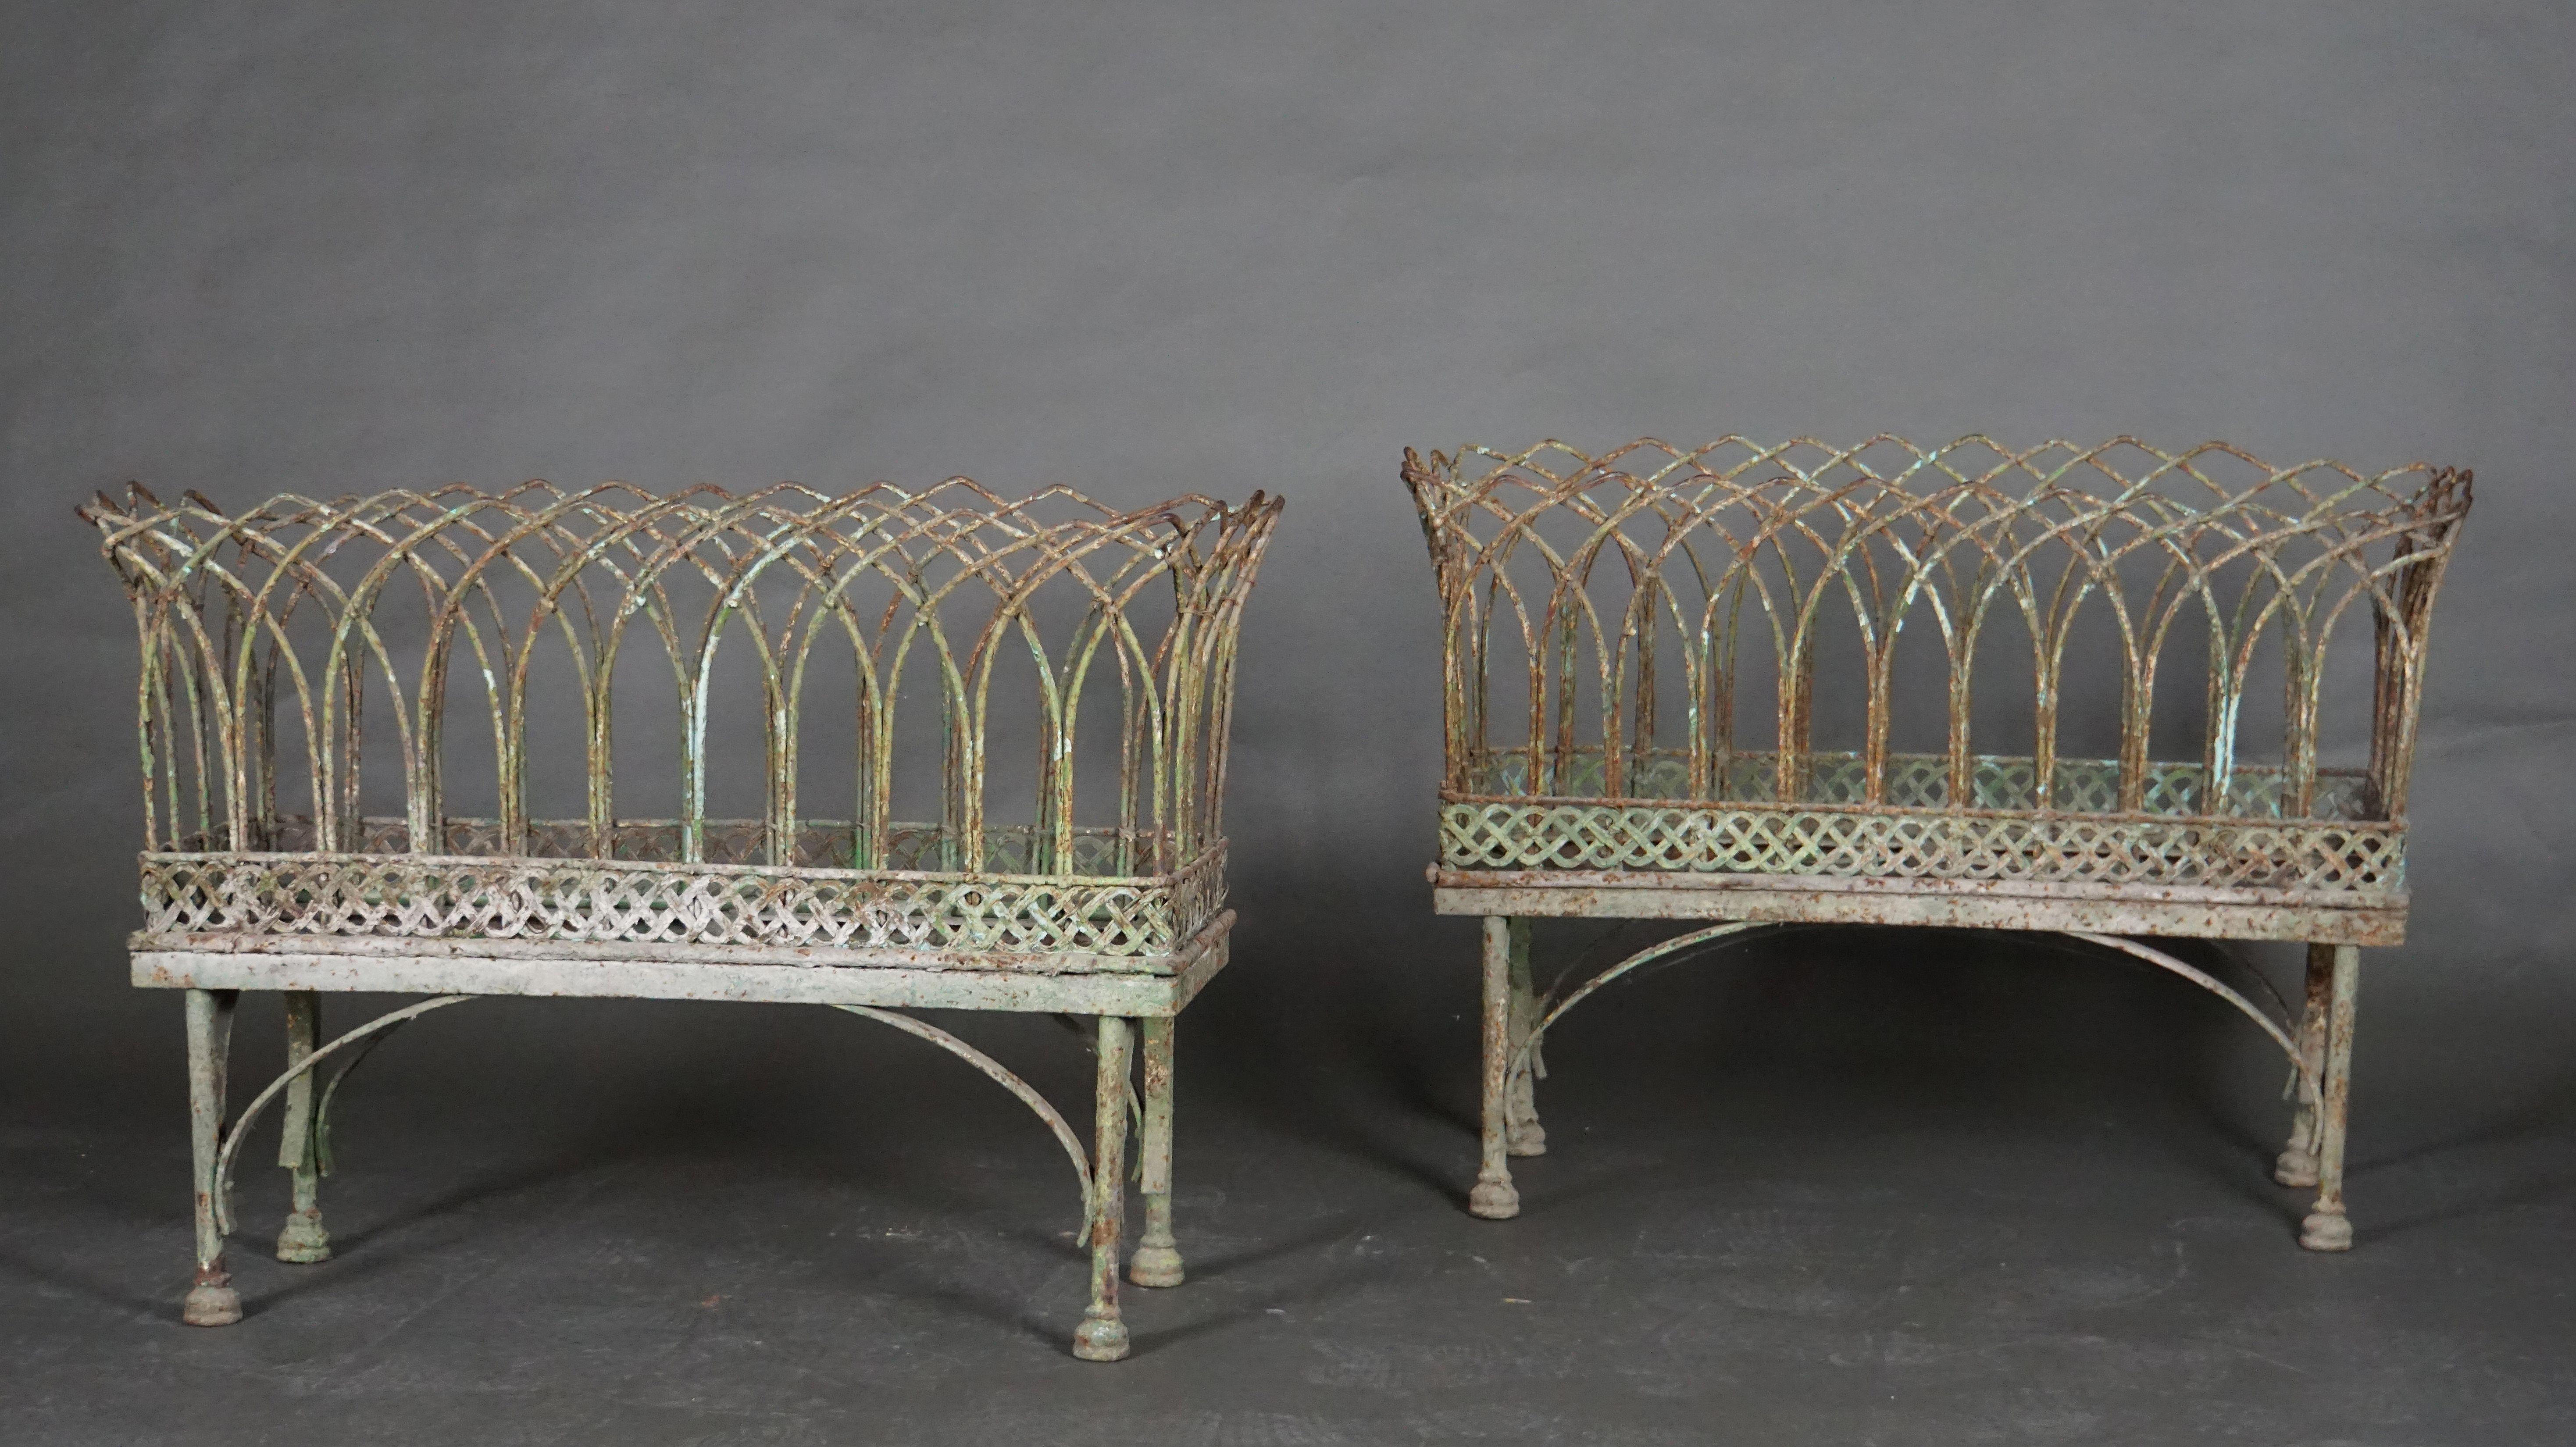 Pair of iron basket-style jardinières with old painting, France, 19th century.
Beautiful patina.
 